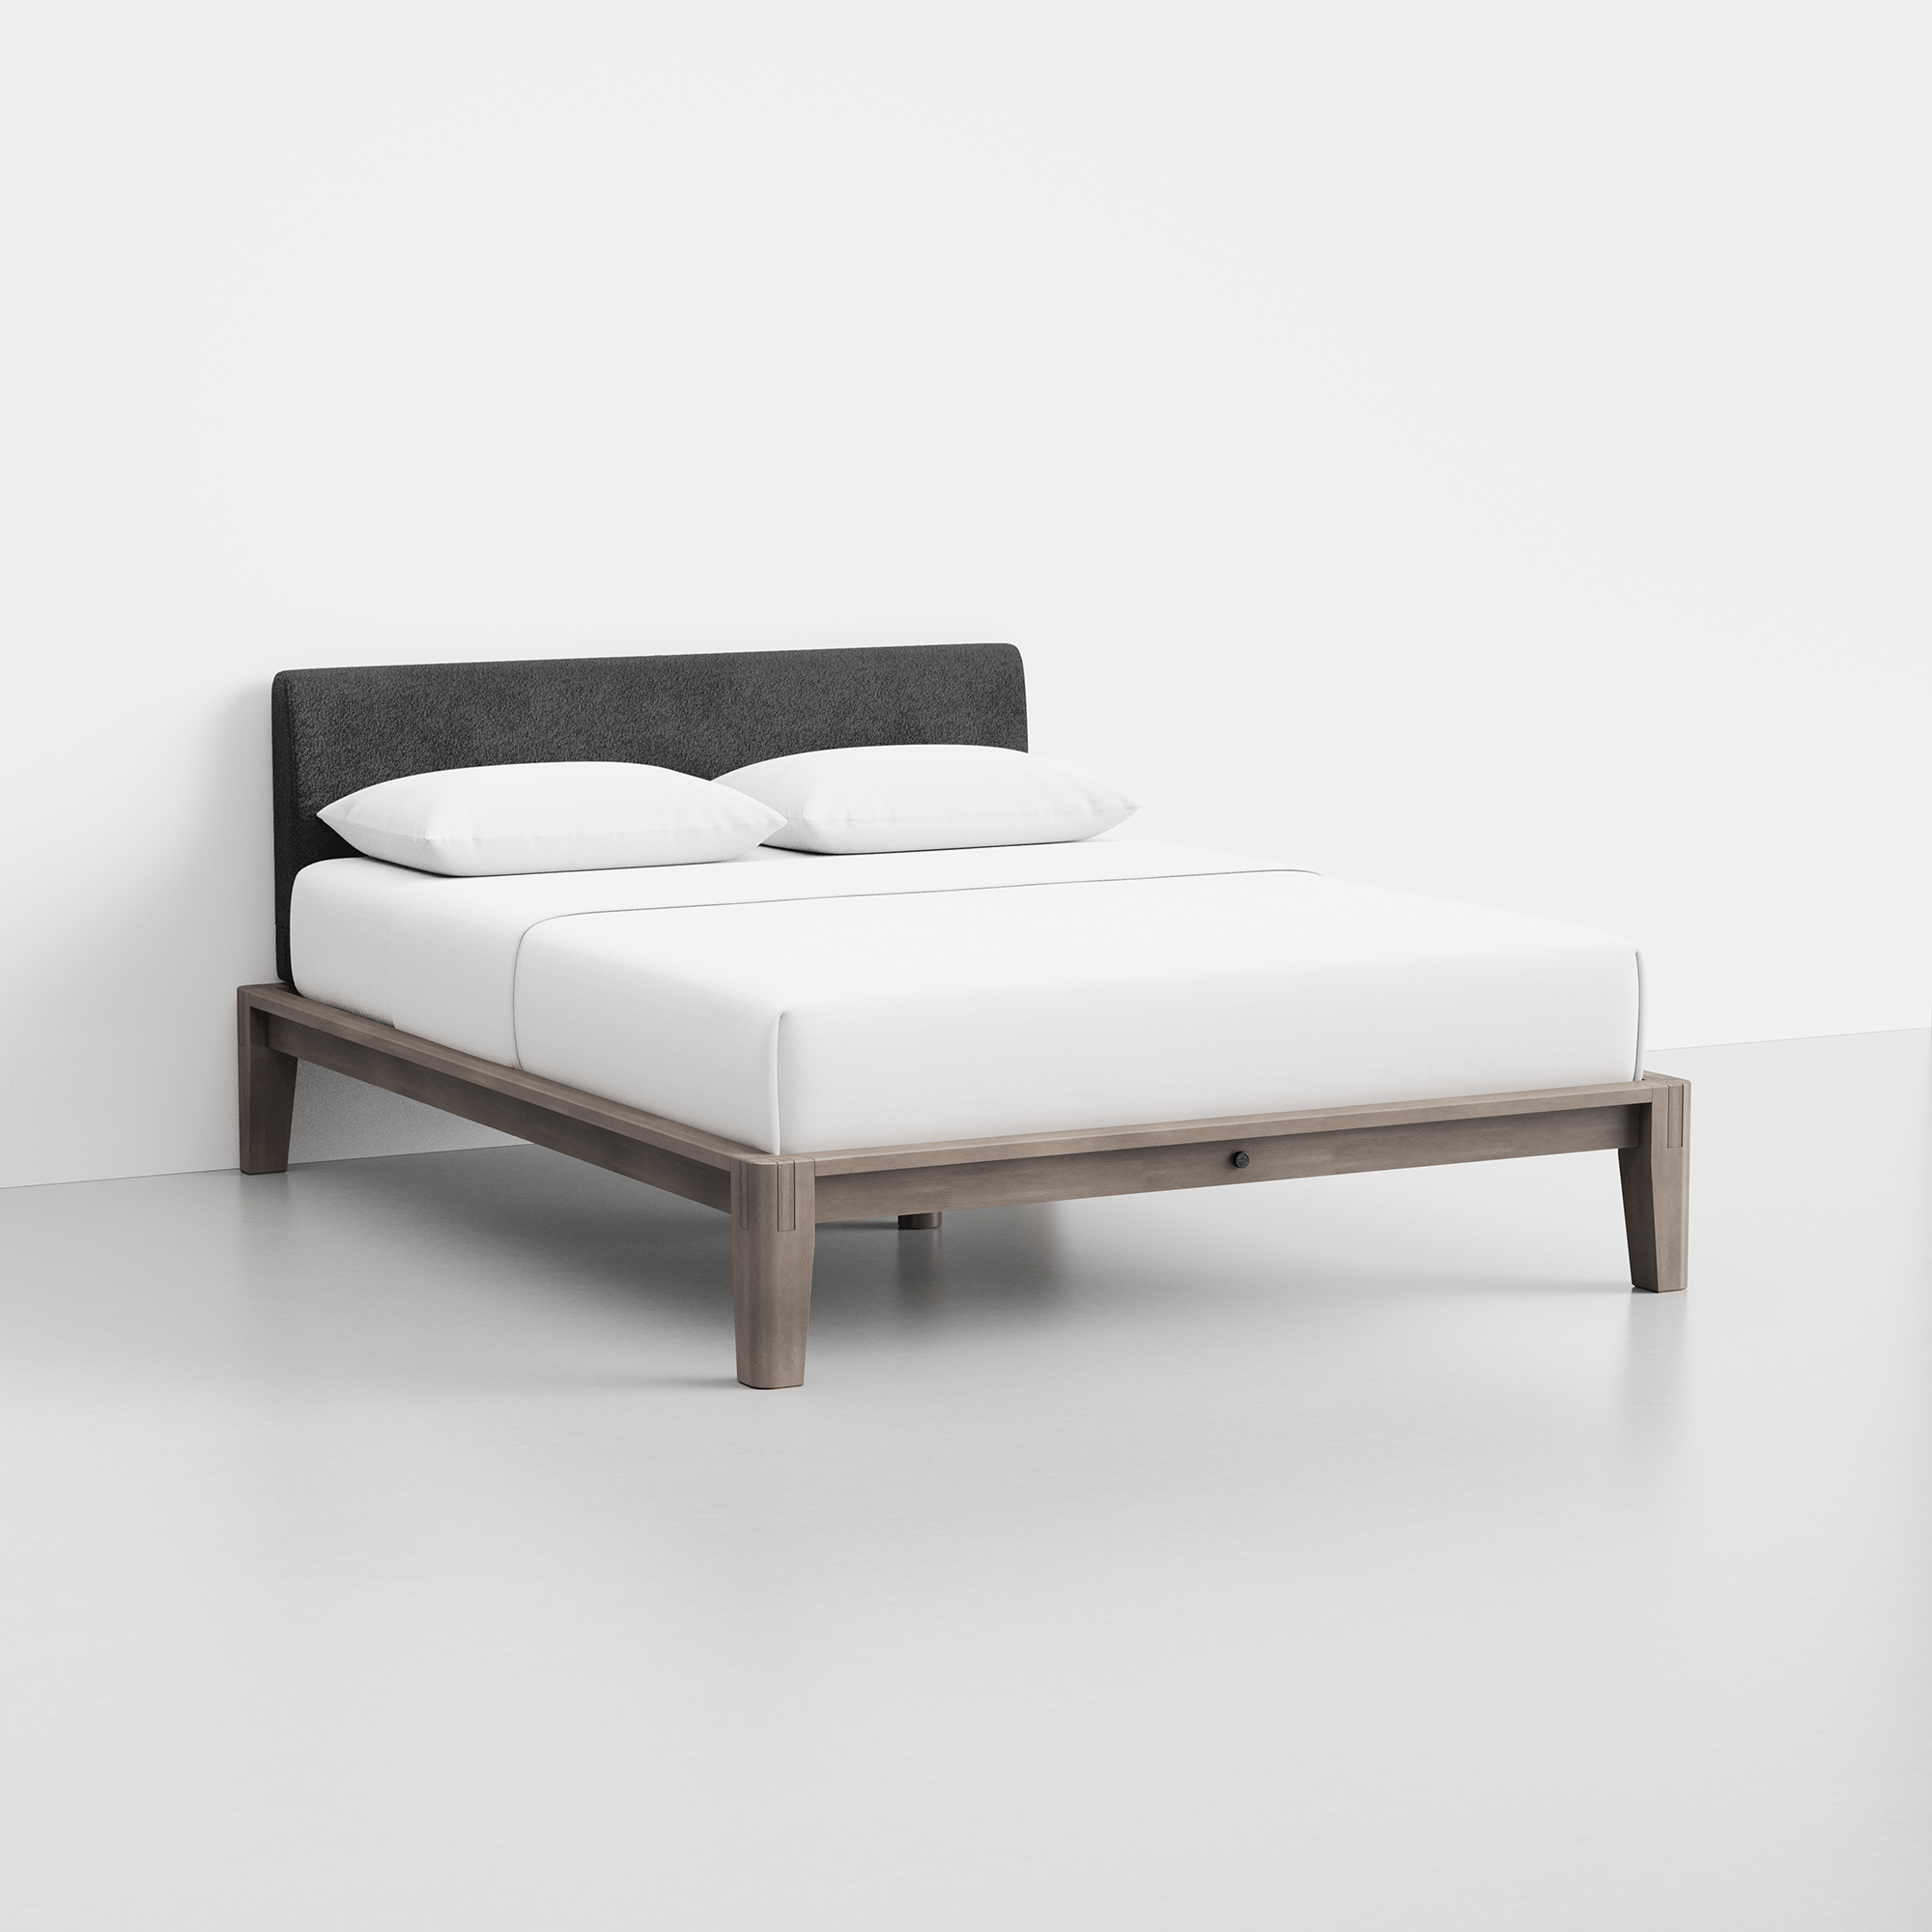 The Bed (Grey / Graphite) - Render - Angled